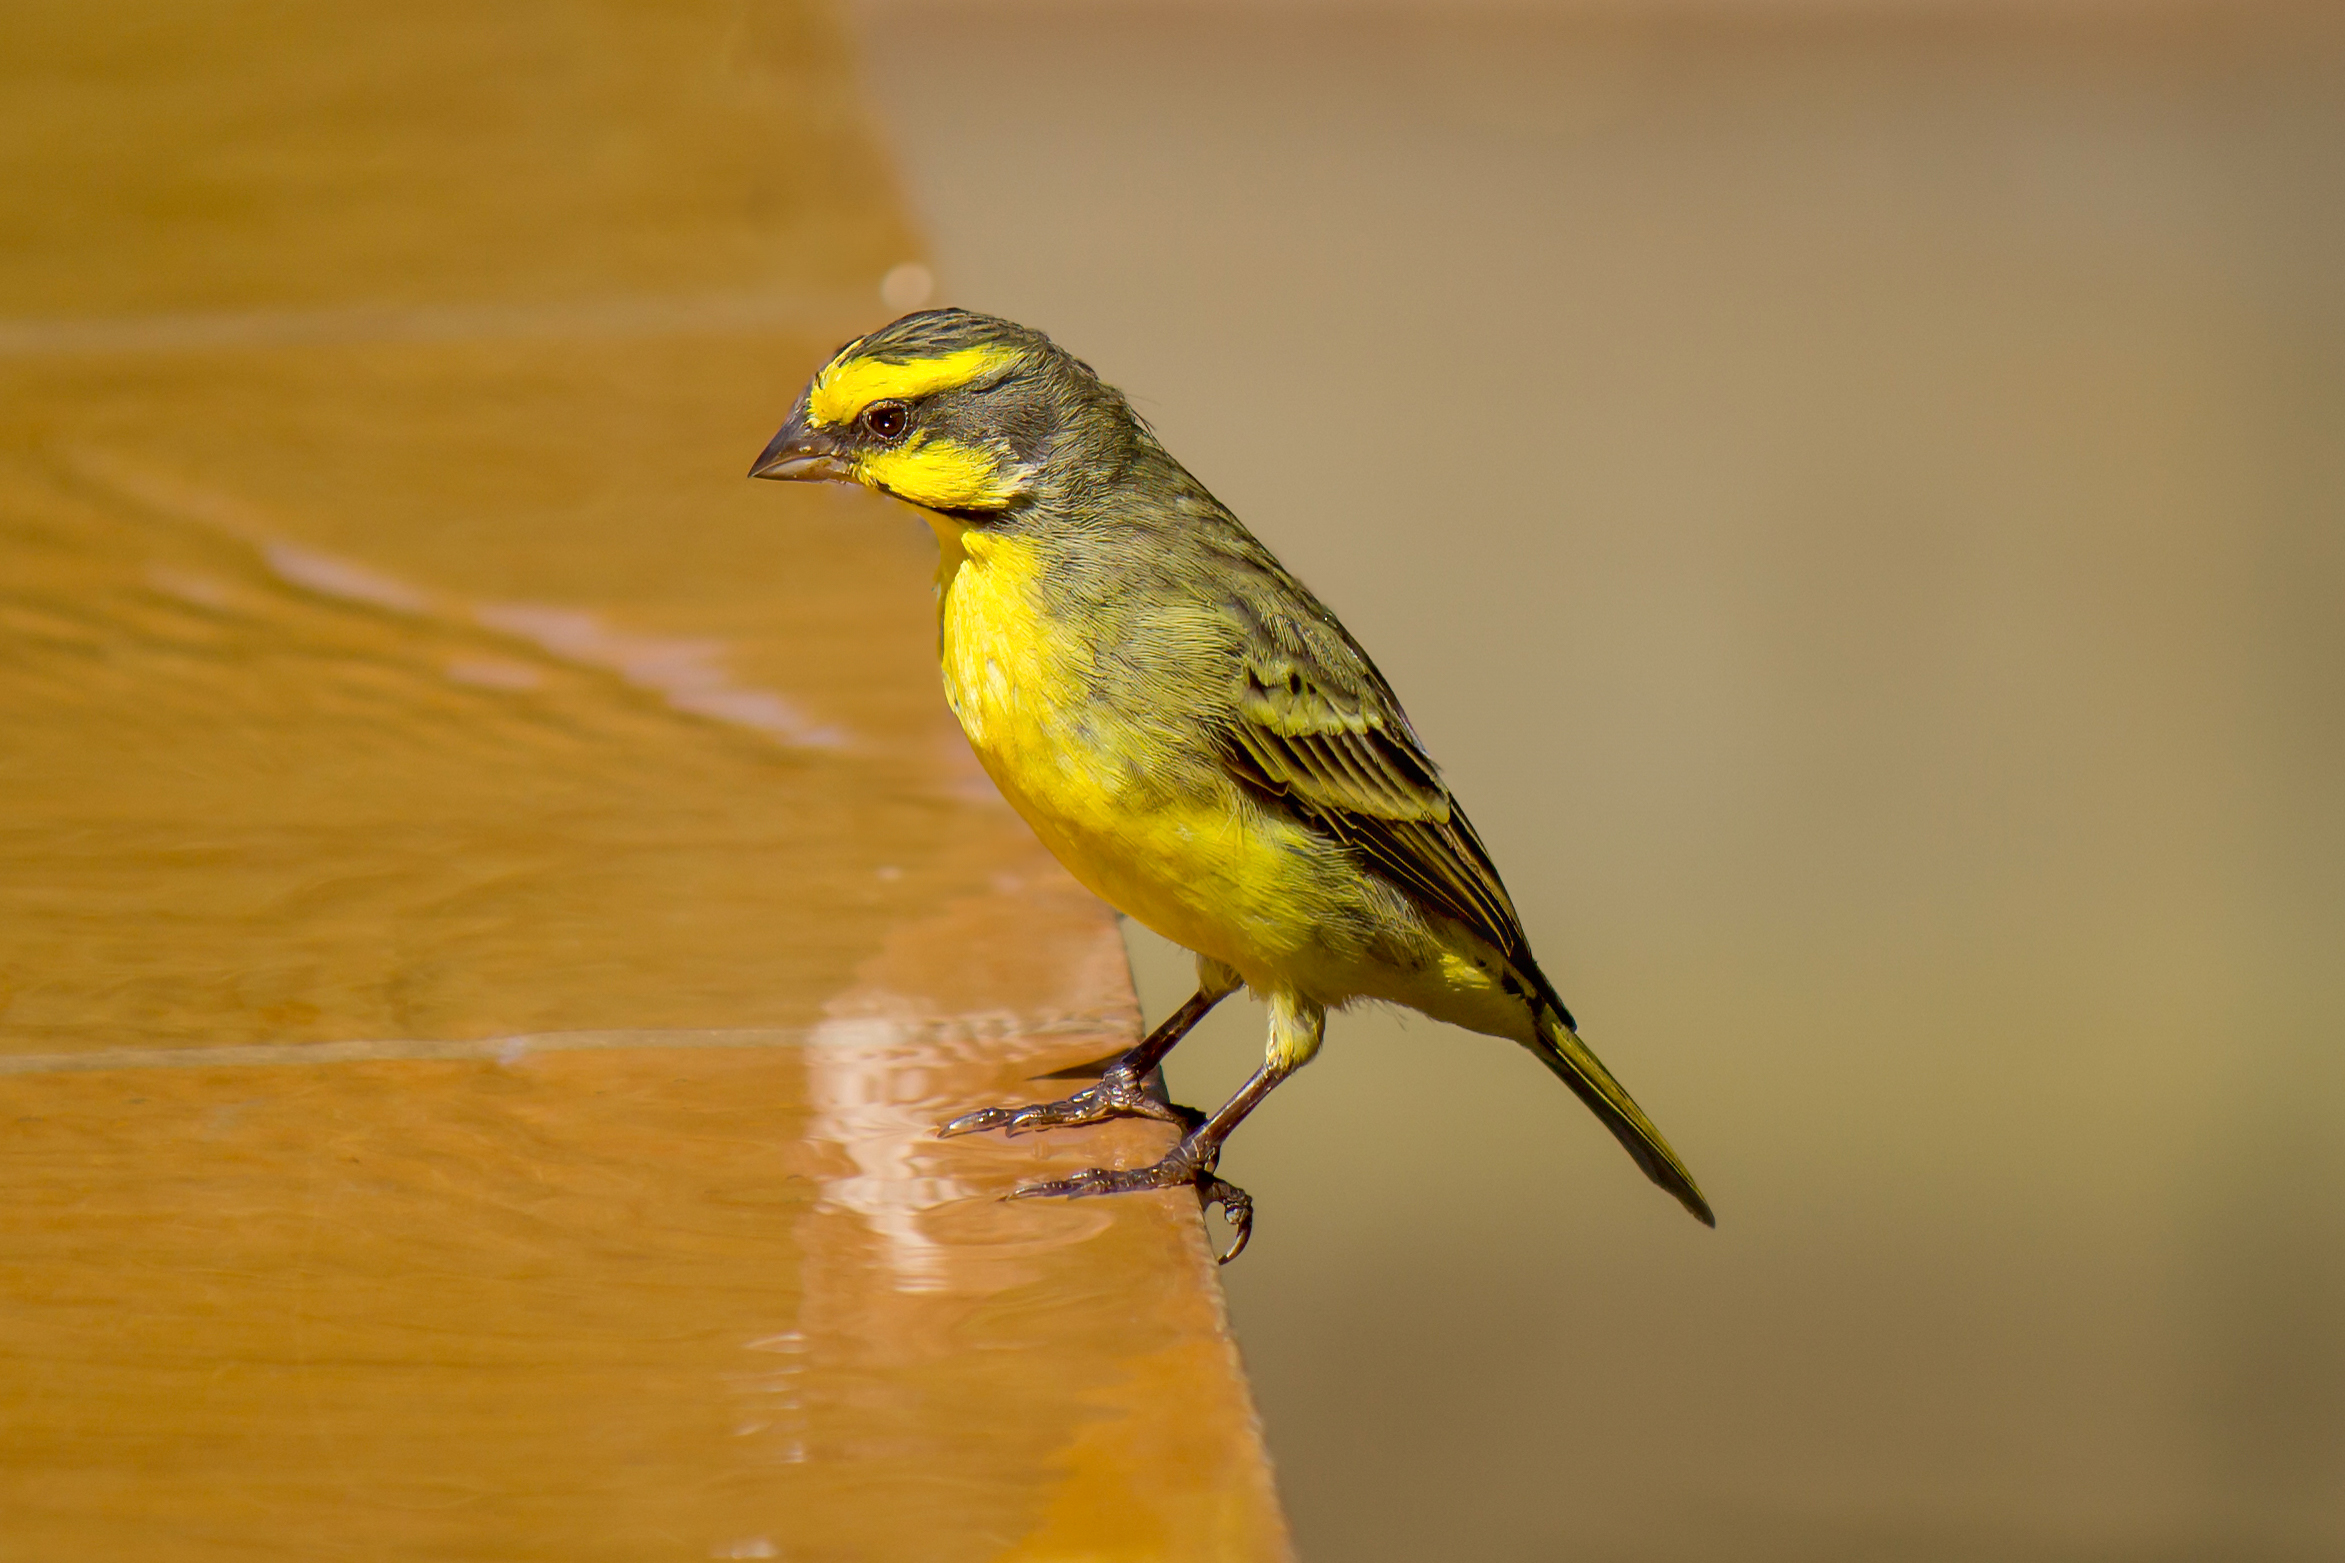 Yellow-fronted Canary (Crithagra mozambica) @ Thanda Private Game Reserve, South Africa. Photo: Håvard Rosenlund